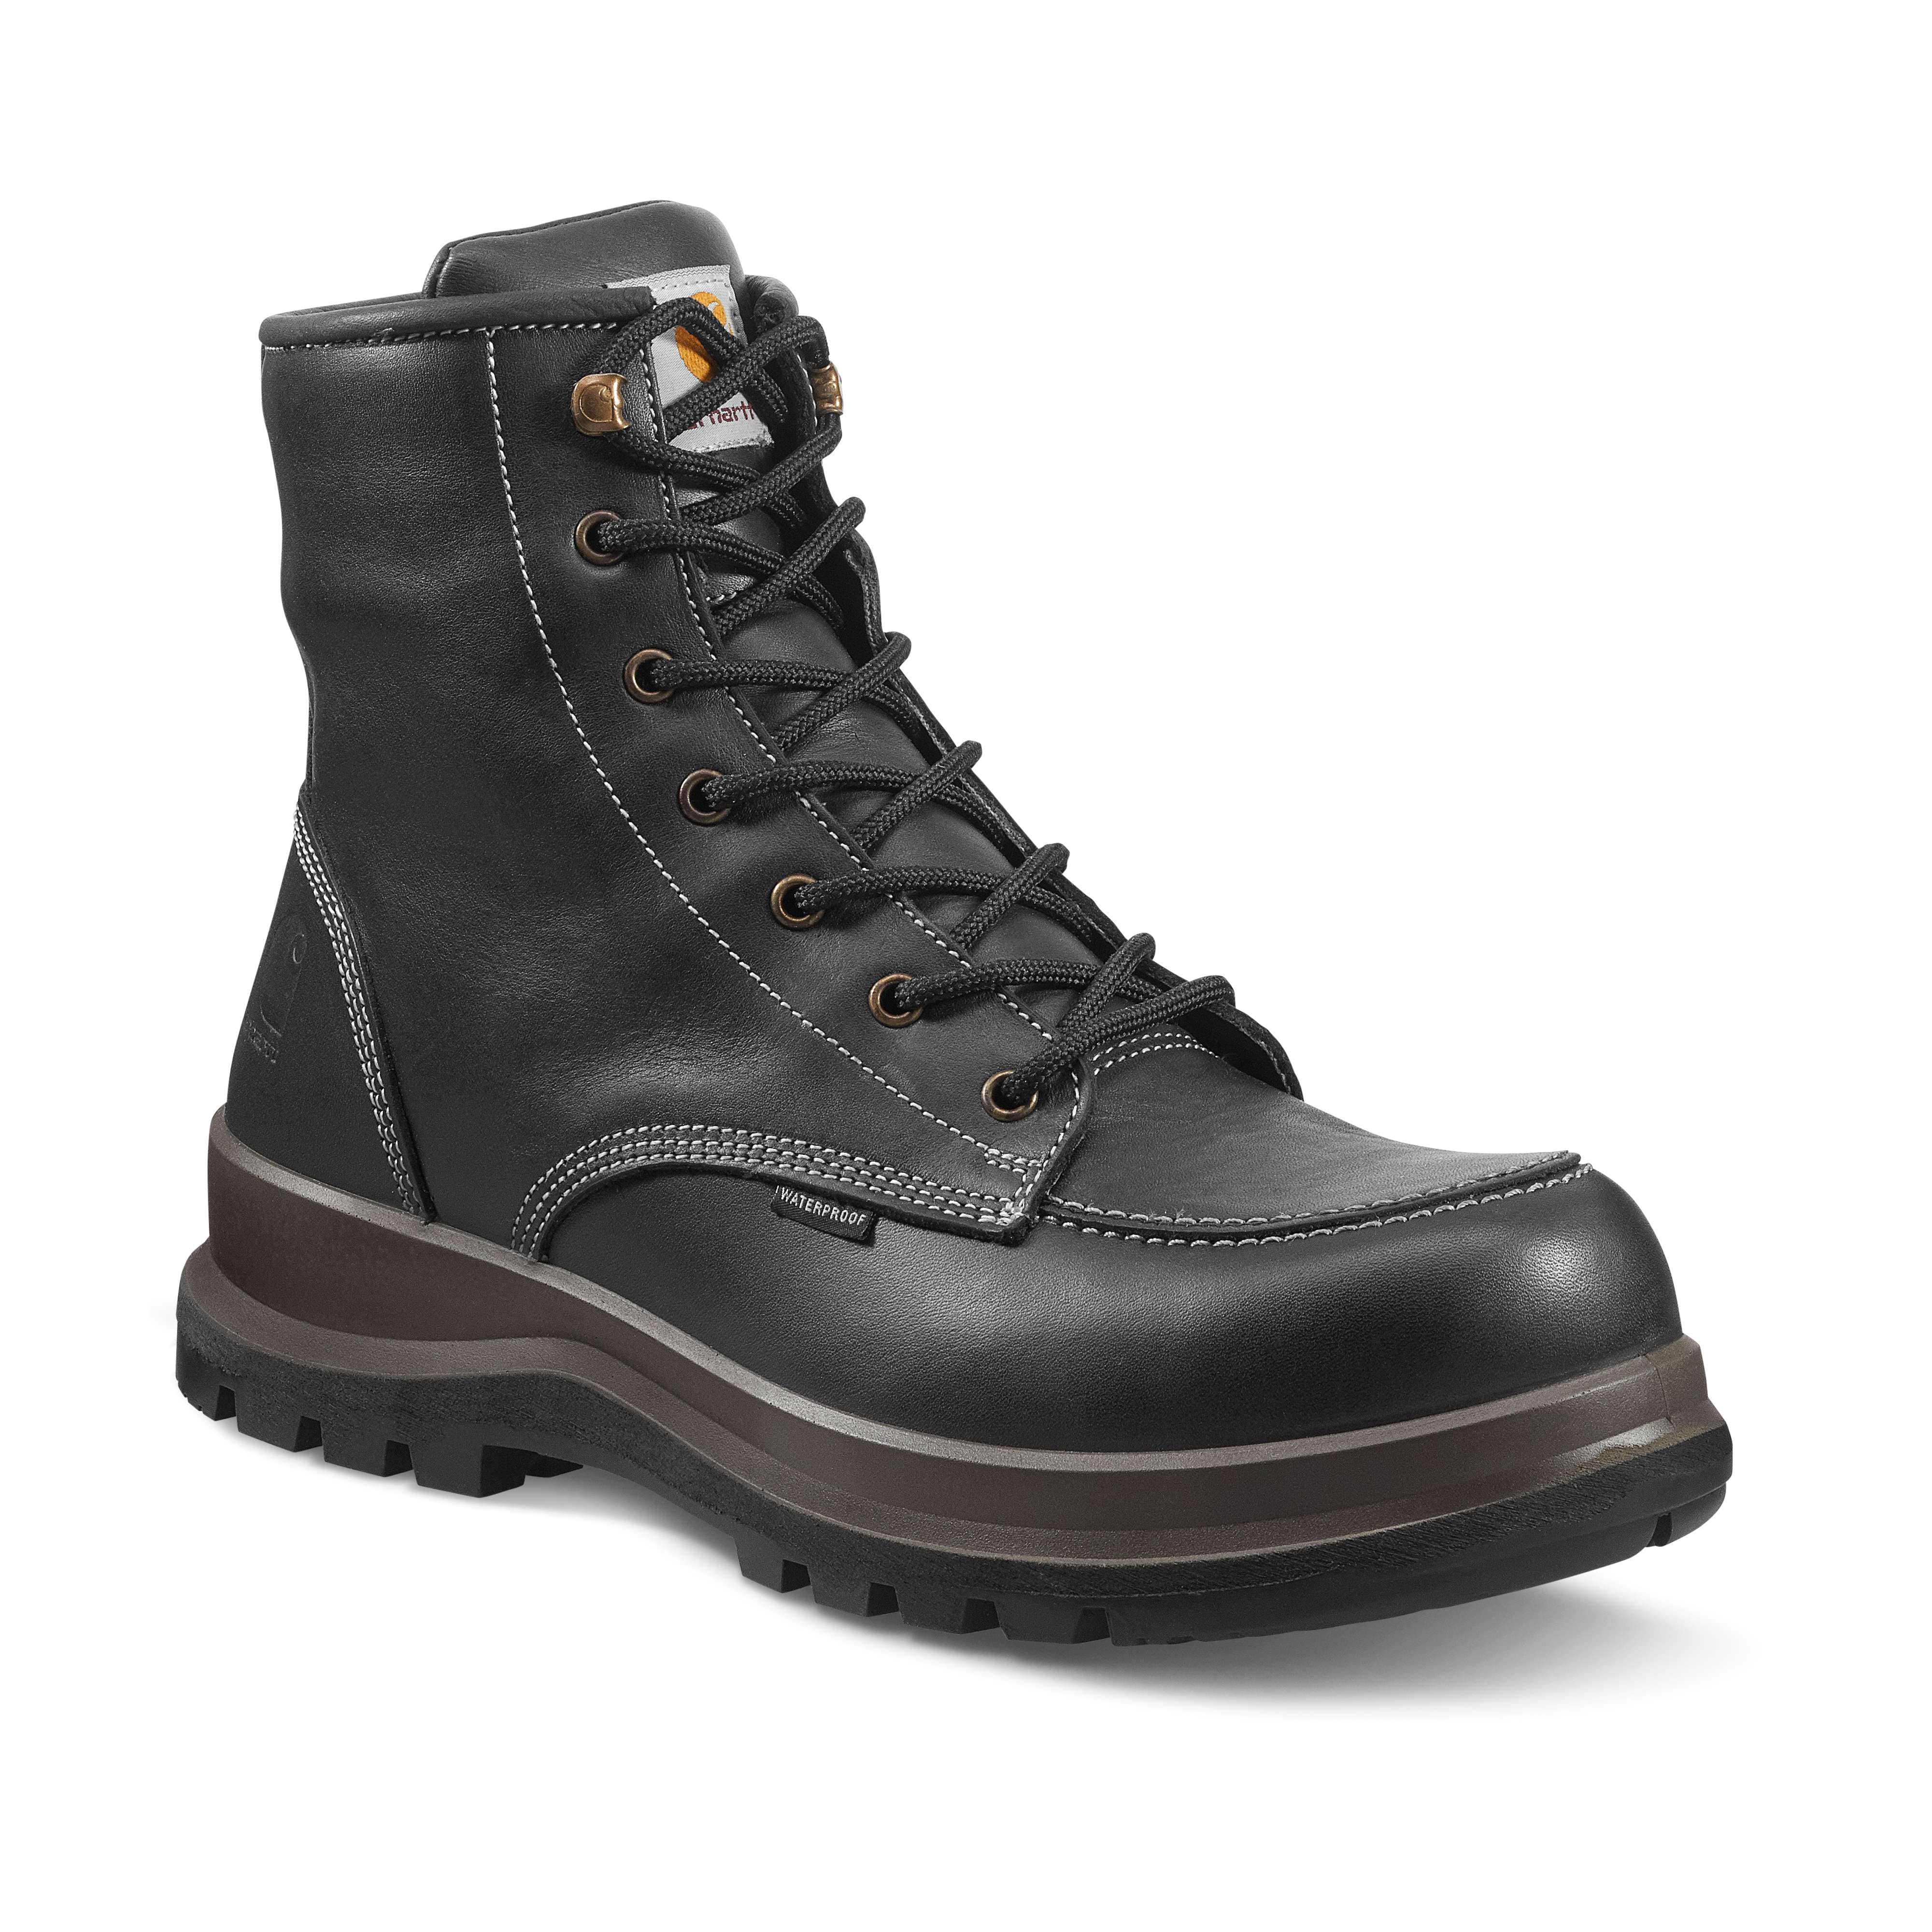 women's s3 safety boots